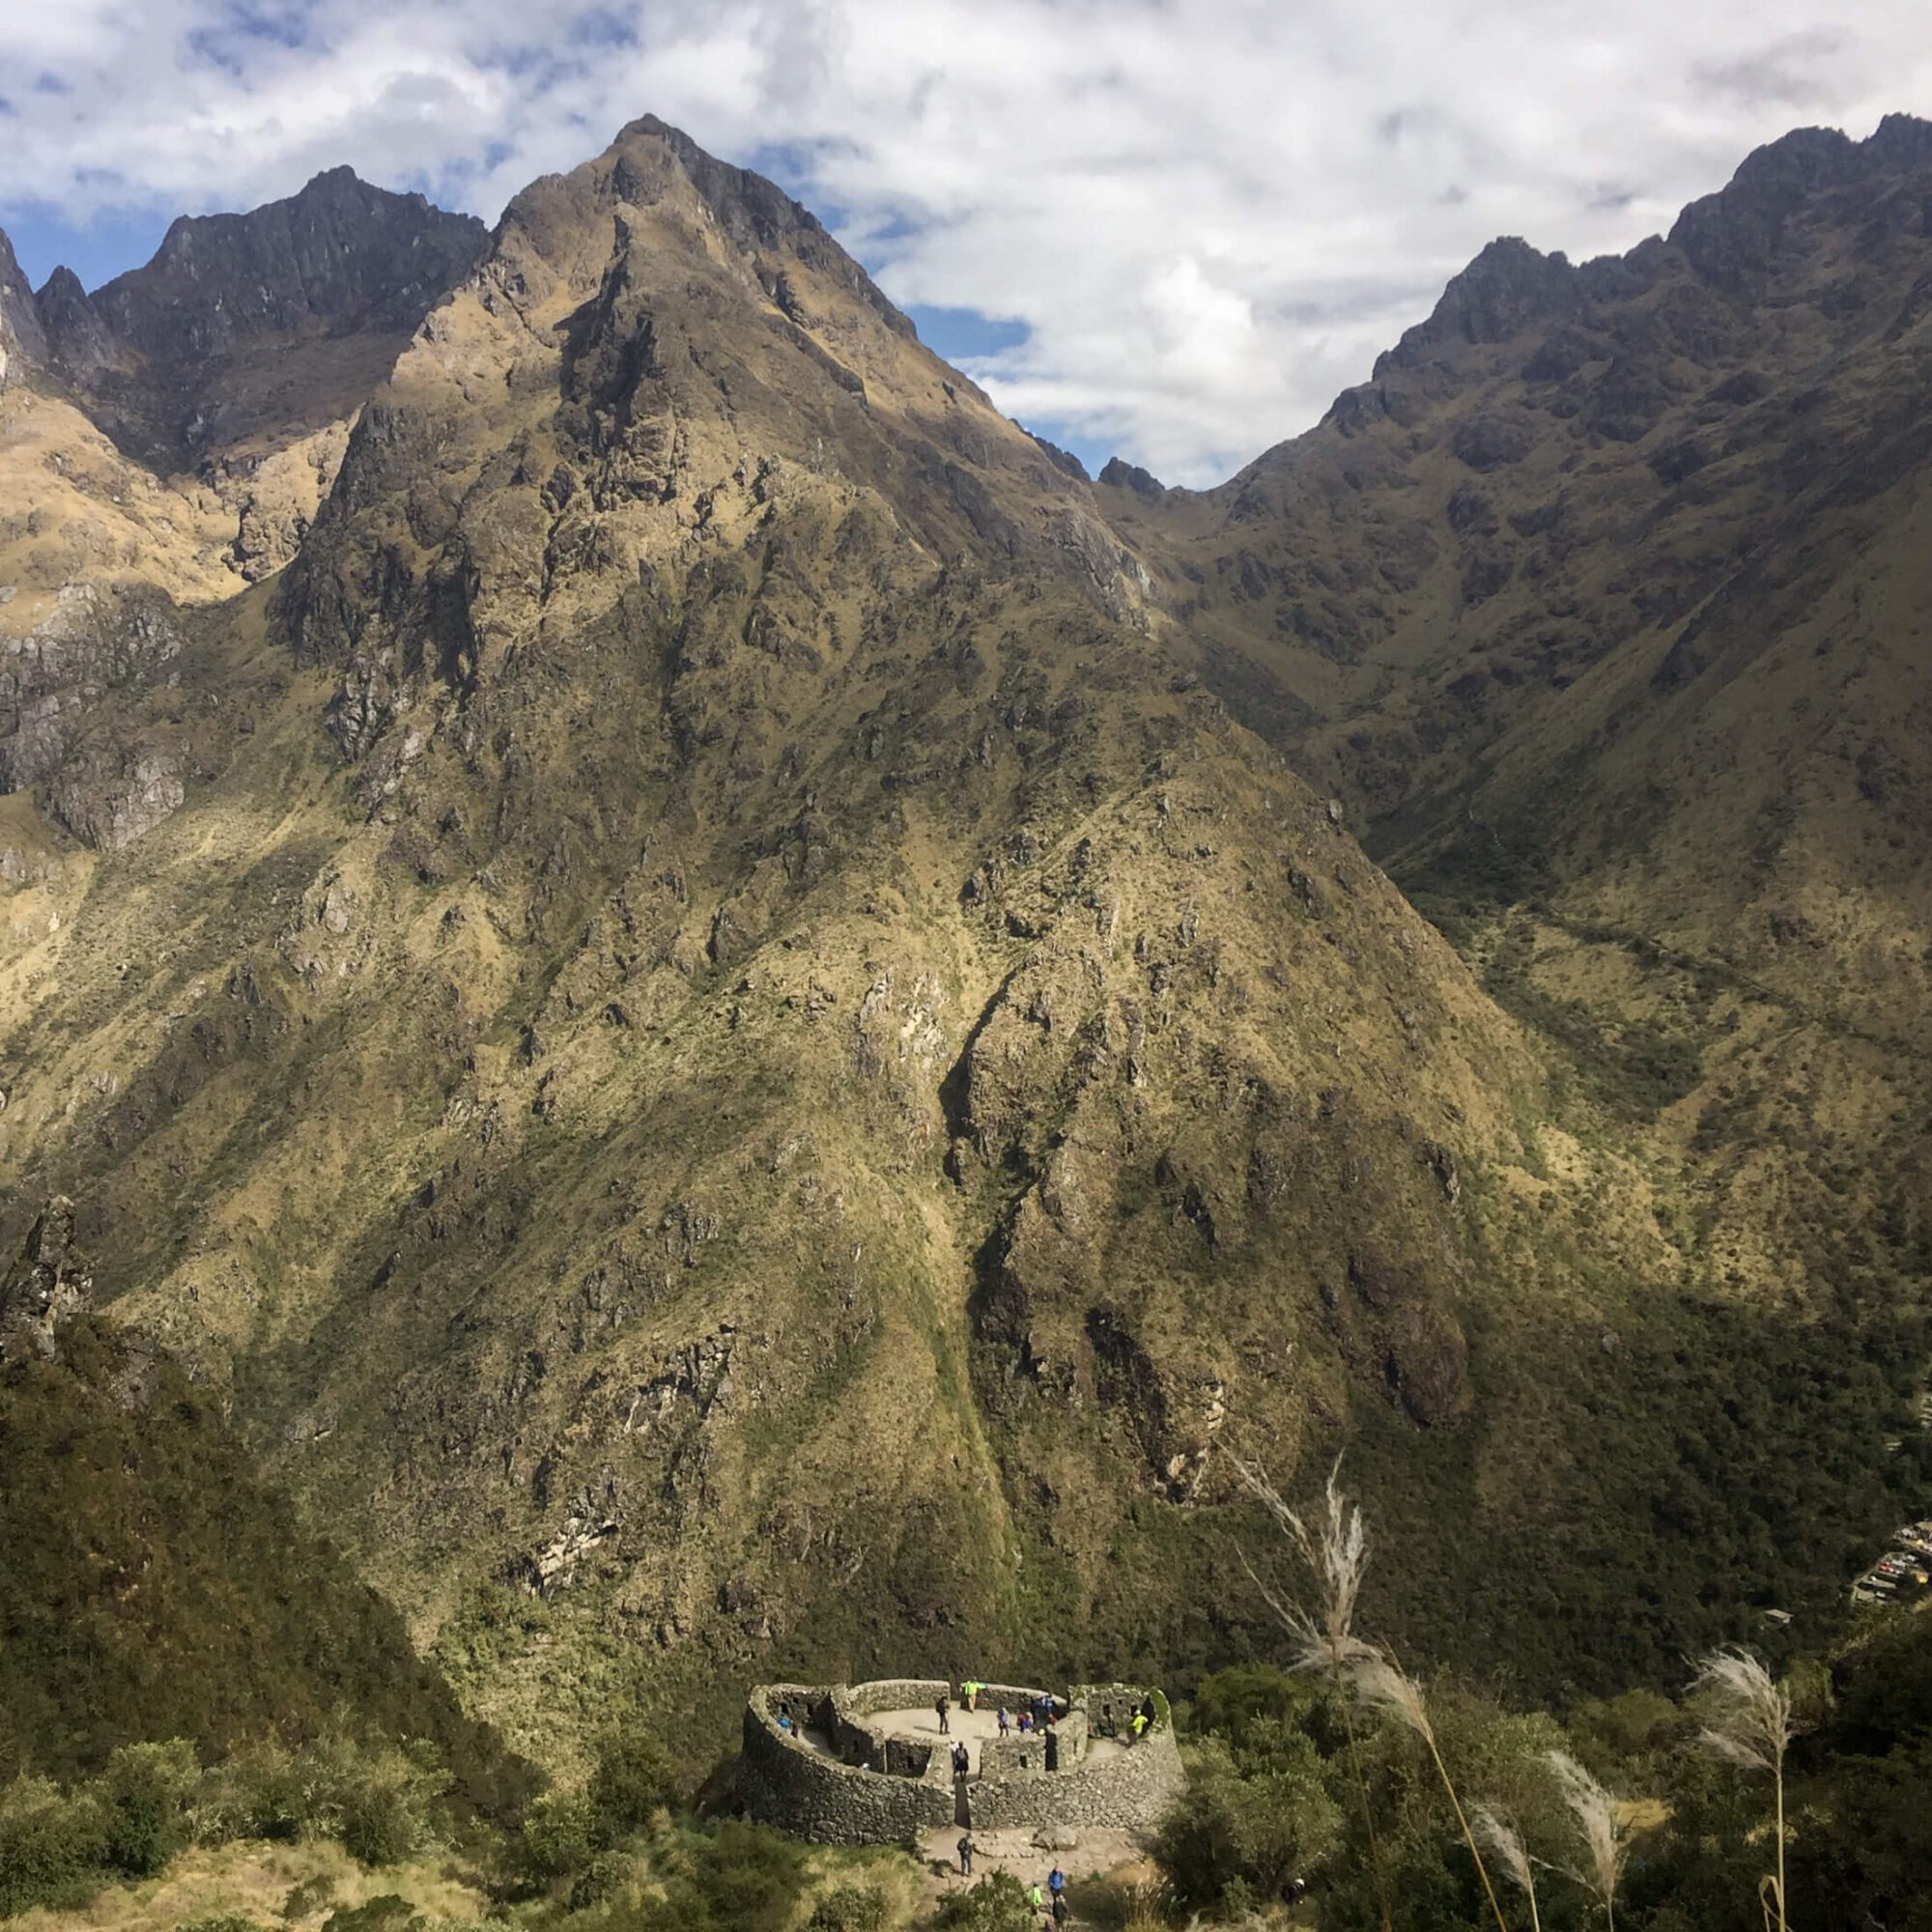 View from a pass on the inka trail